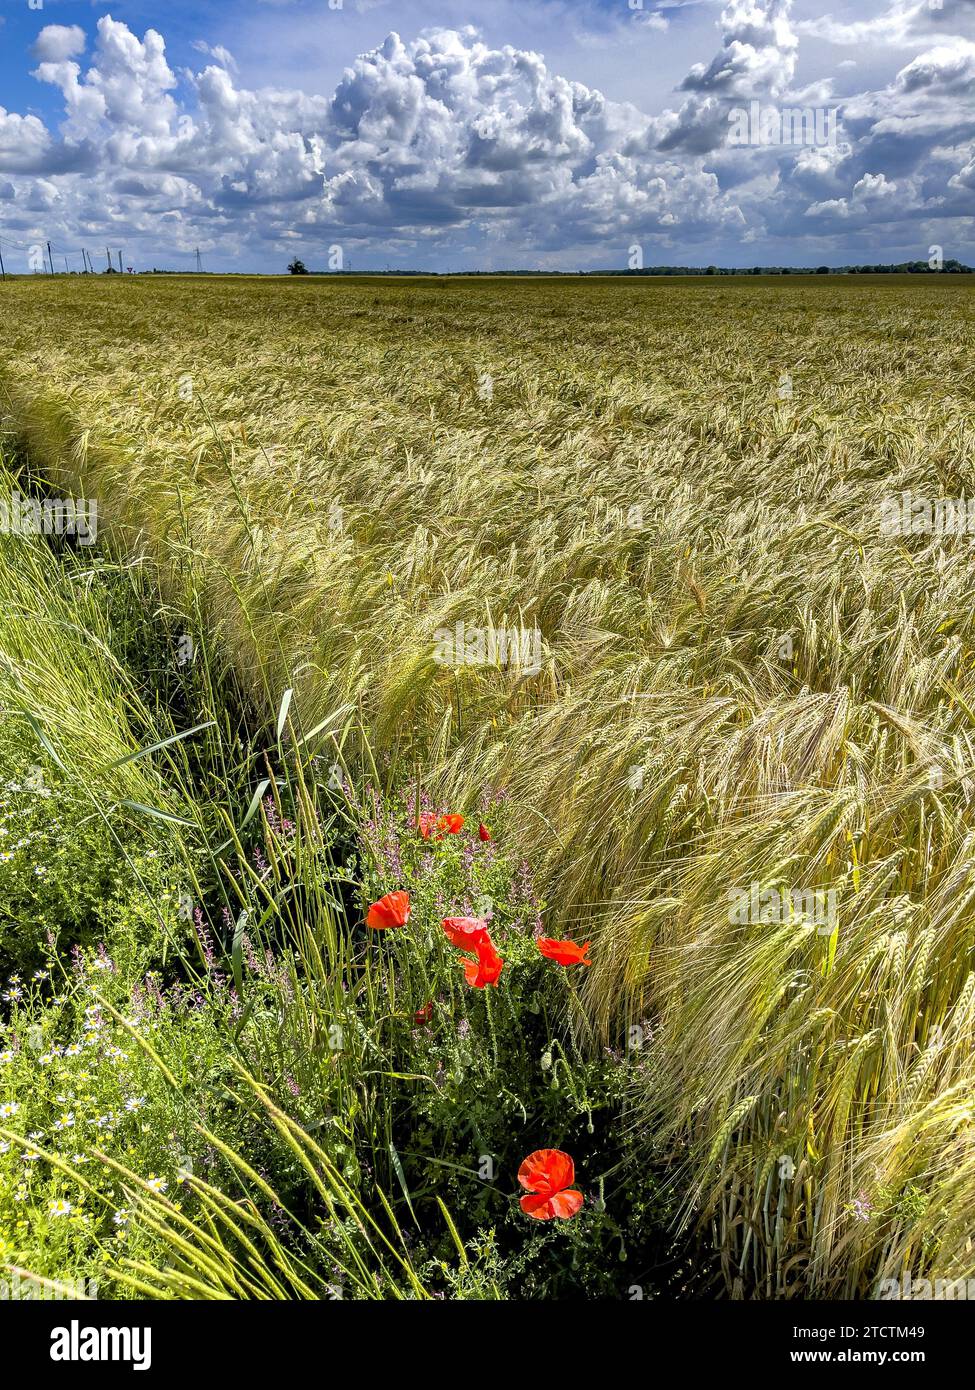 Poppies and field under a cloudy sky in Eure, France Stock Photo